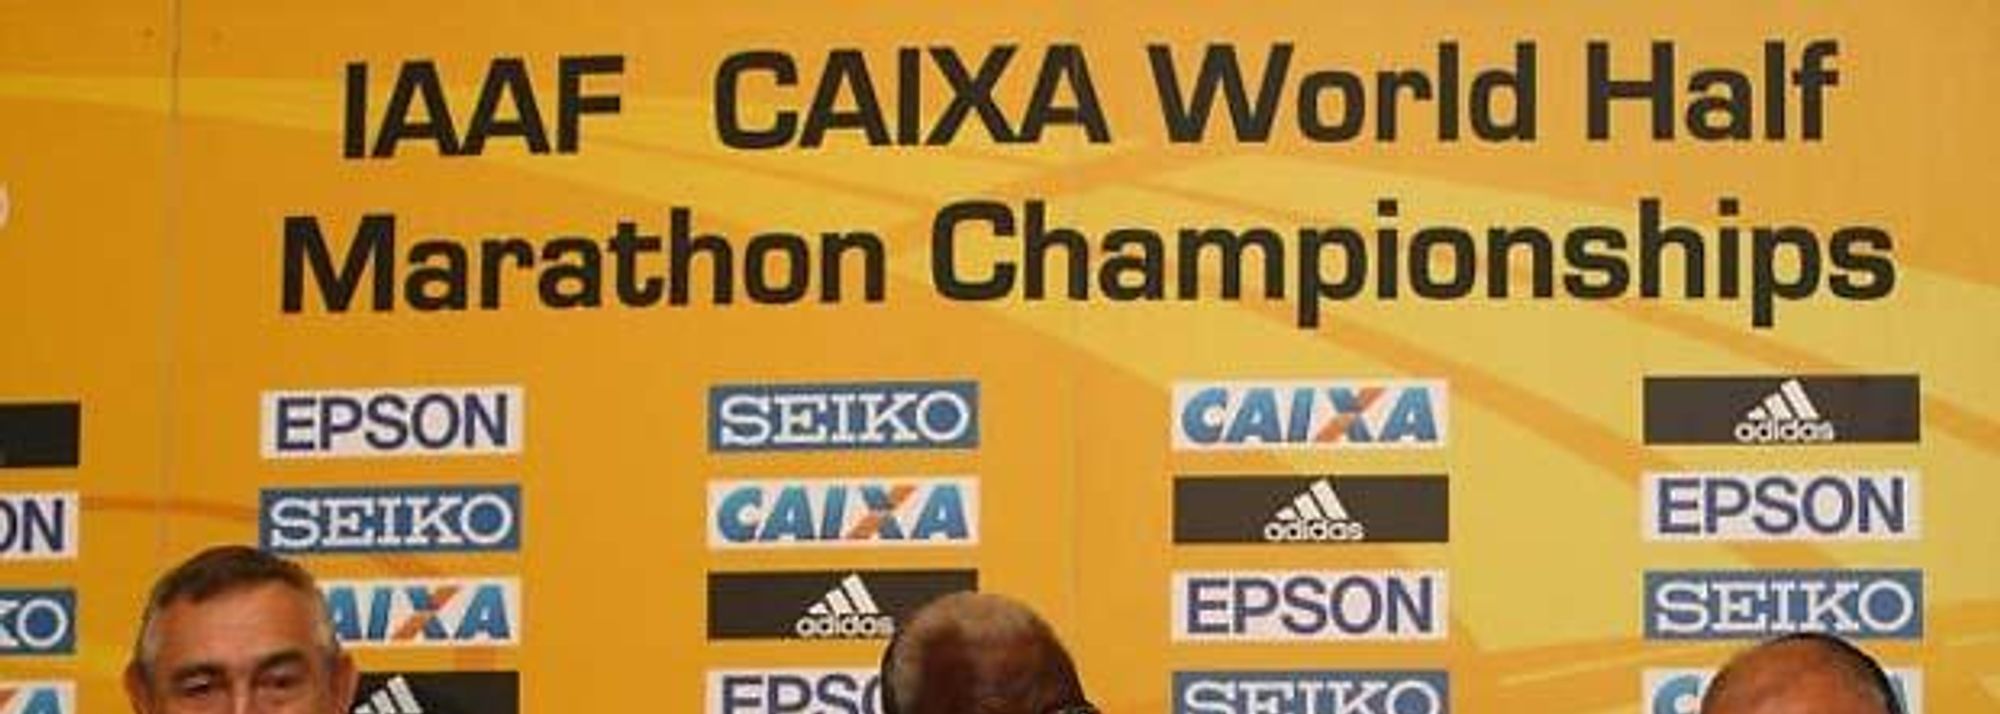 - Rio de Janeiro, Brazil – At today’s IAAF Press Conference ahead of tomorrow’s IAAF / CAIXA World Half Marathon Championships (Sunday 12 Oct), IAAF President Lamine Diack formerly opened the championships with the following comments to the assembled media.</P>